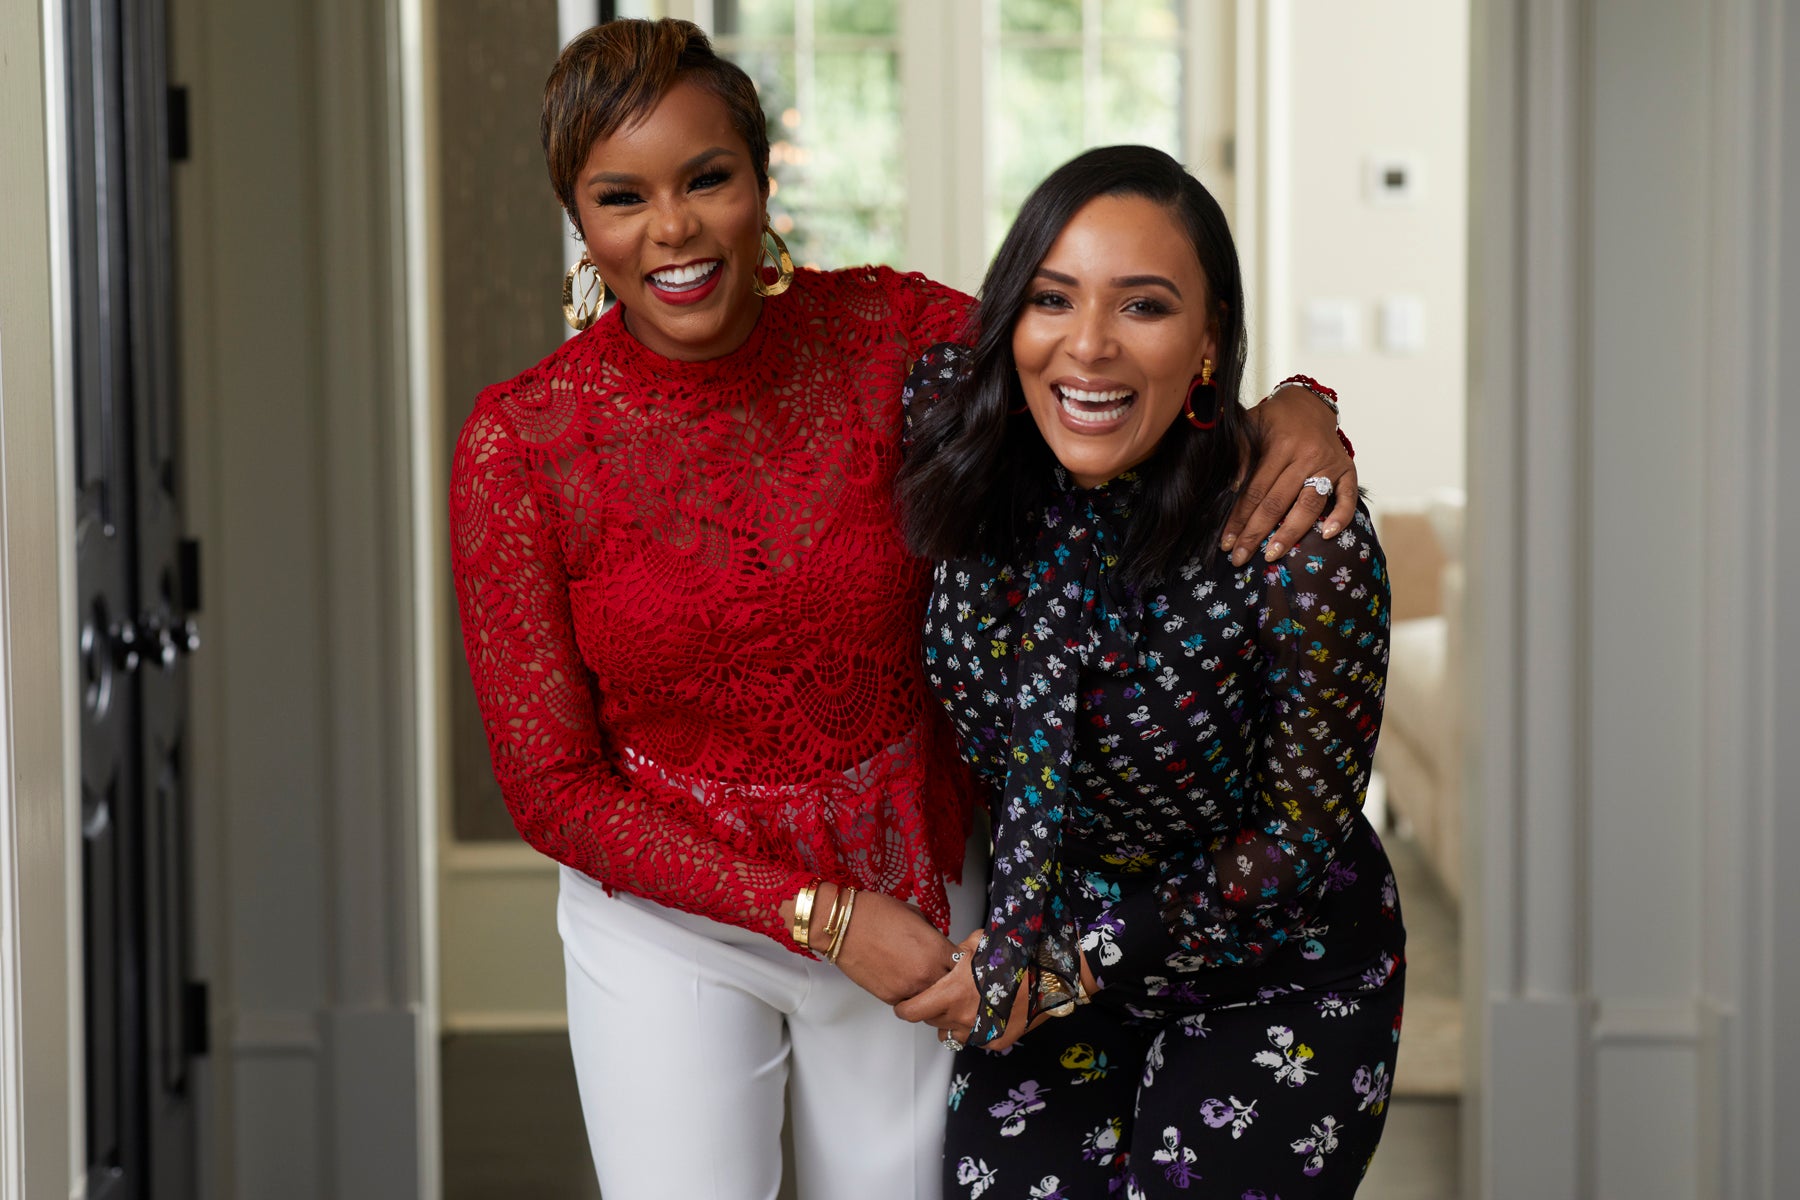 Watch Now: Keri Hilson, LeToya Luckett, and Eudoxie Bridges Reflect On The Lessons Of Love and Friendship